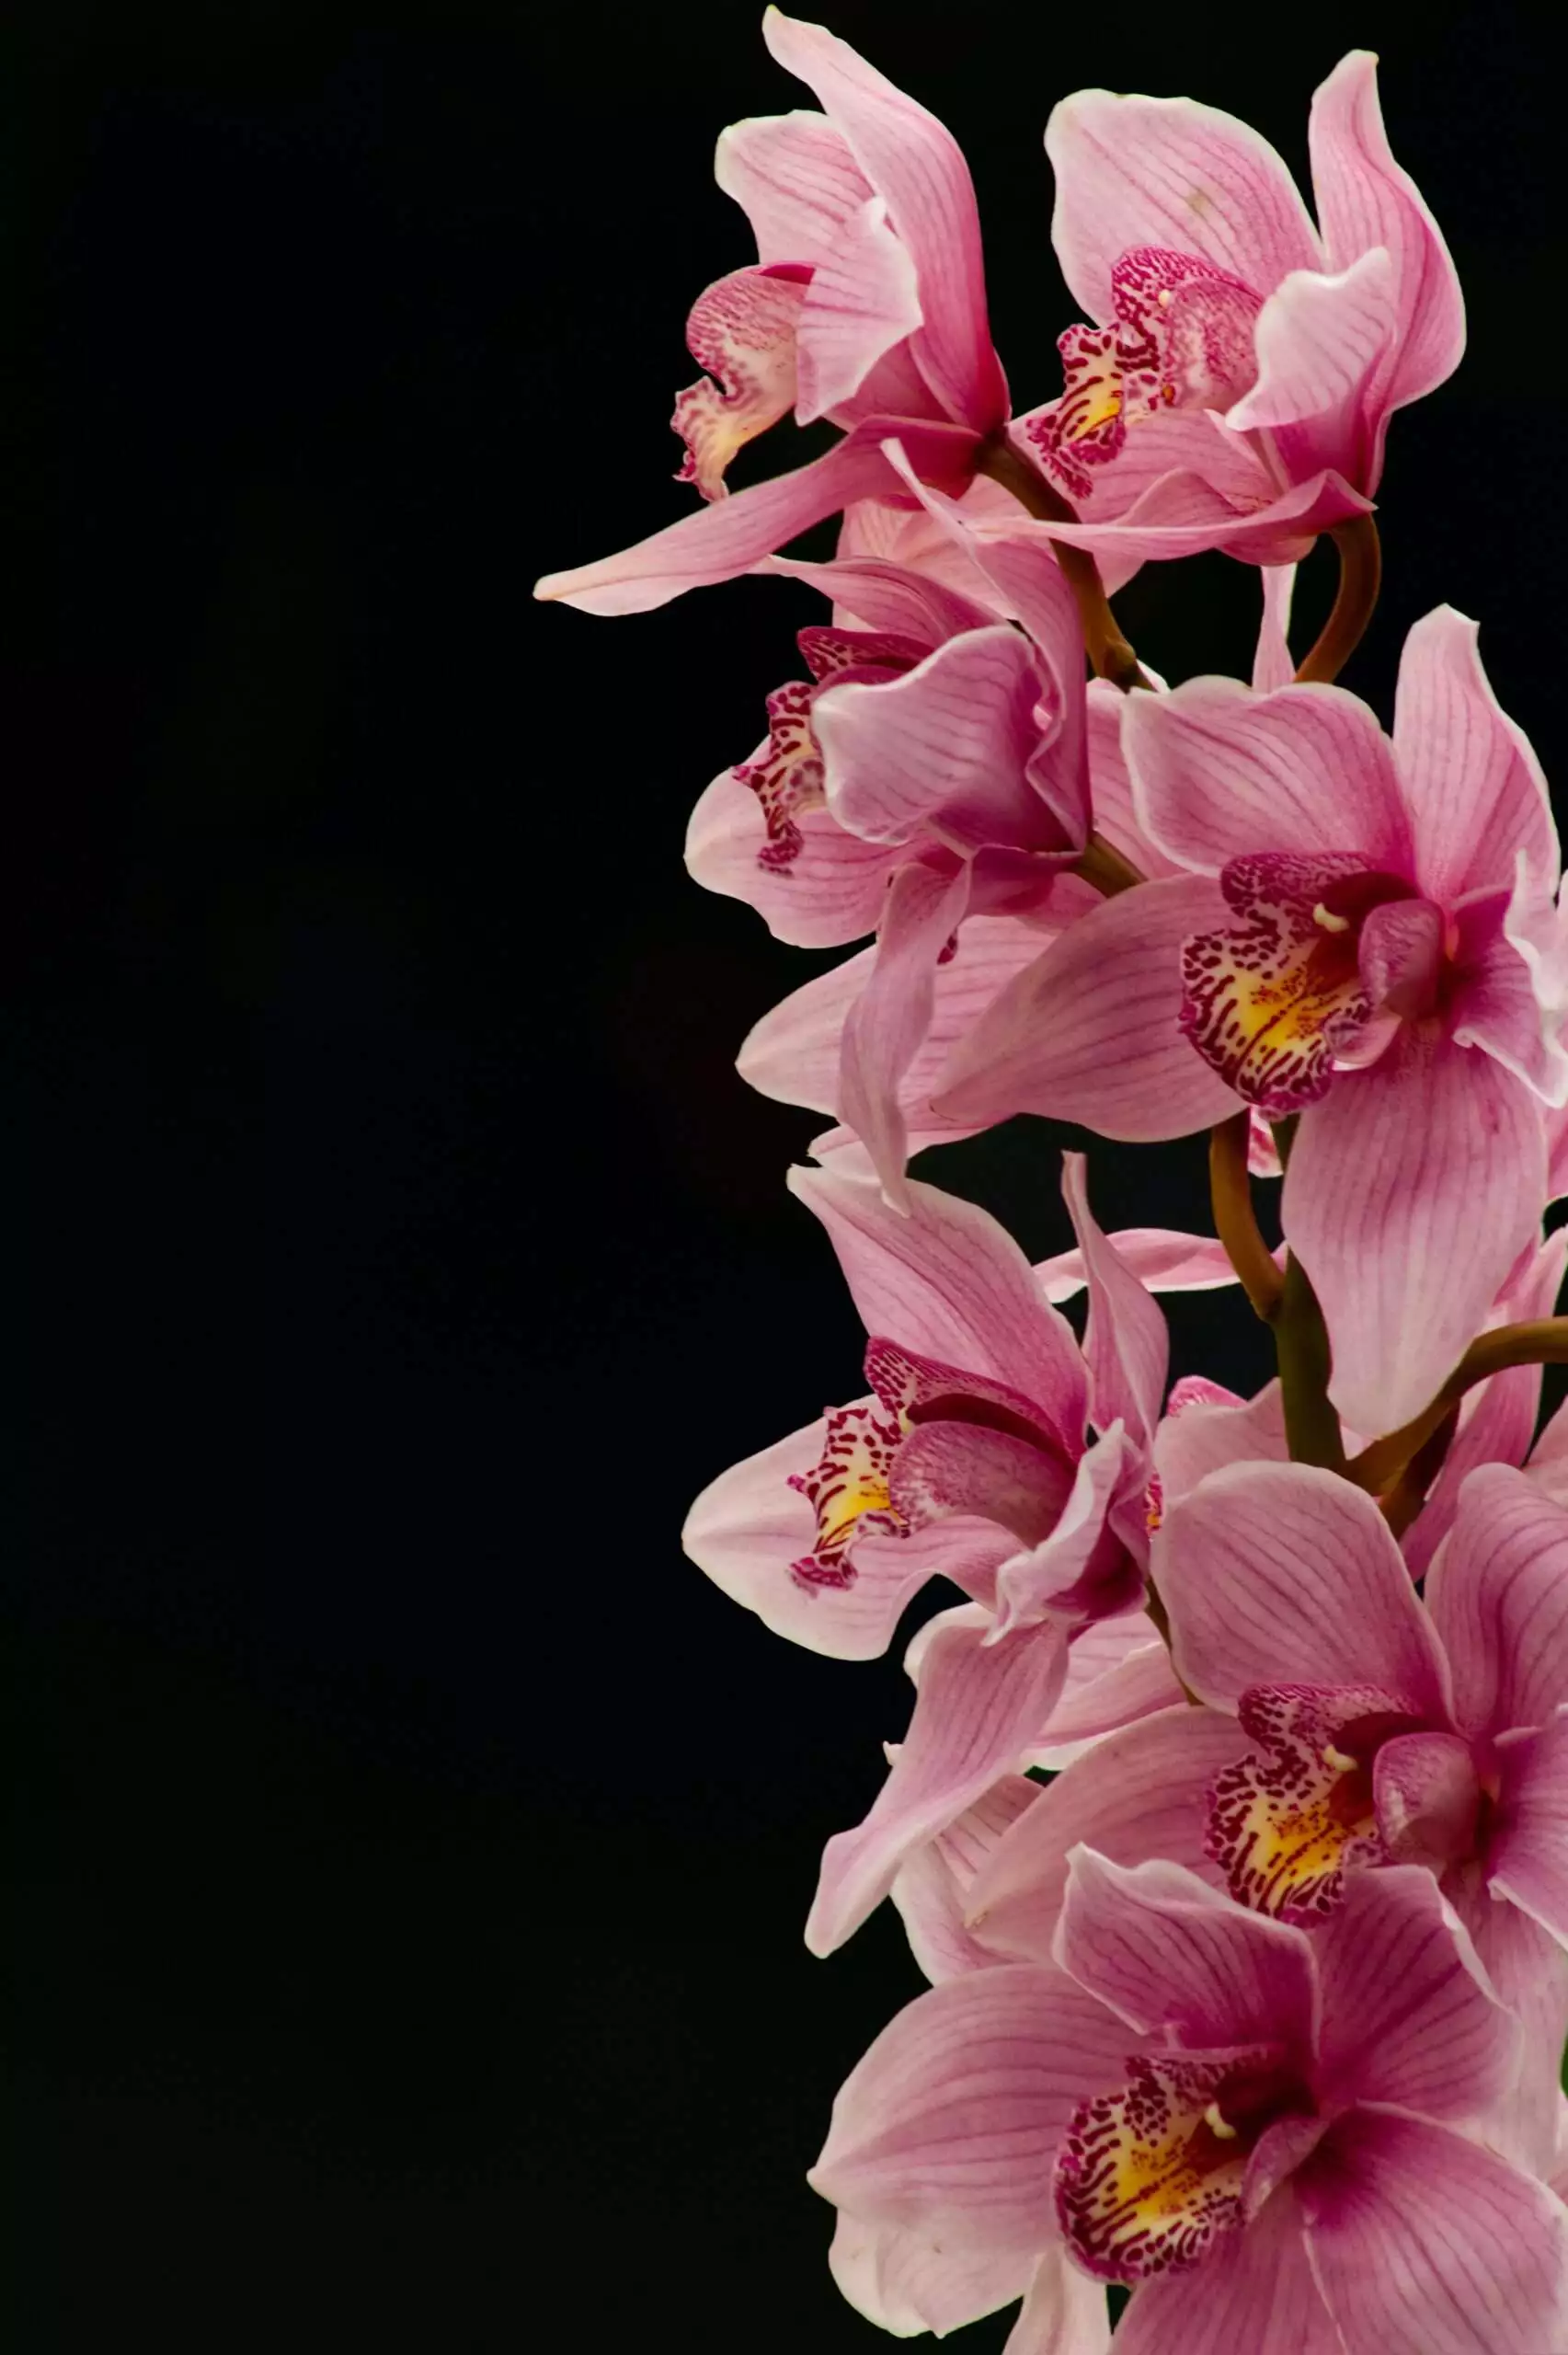 Types of orchids